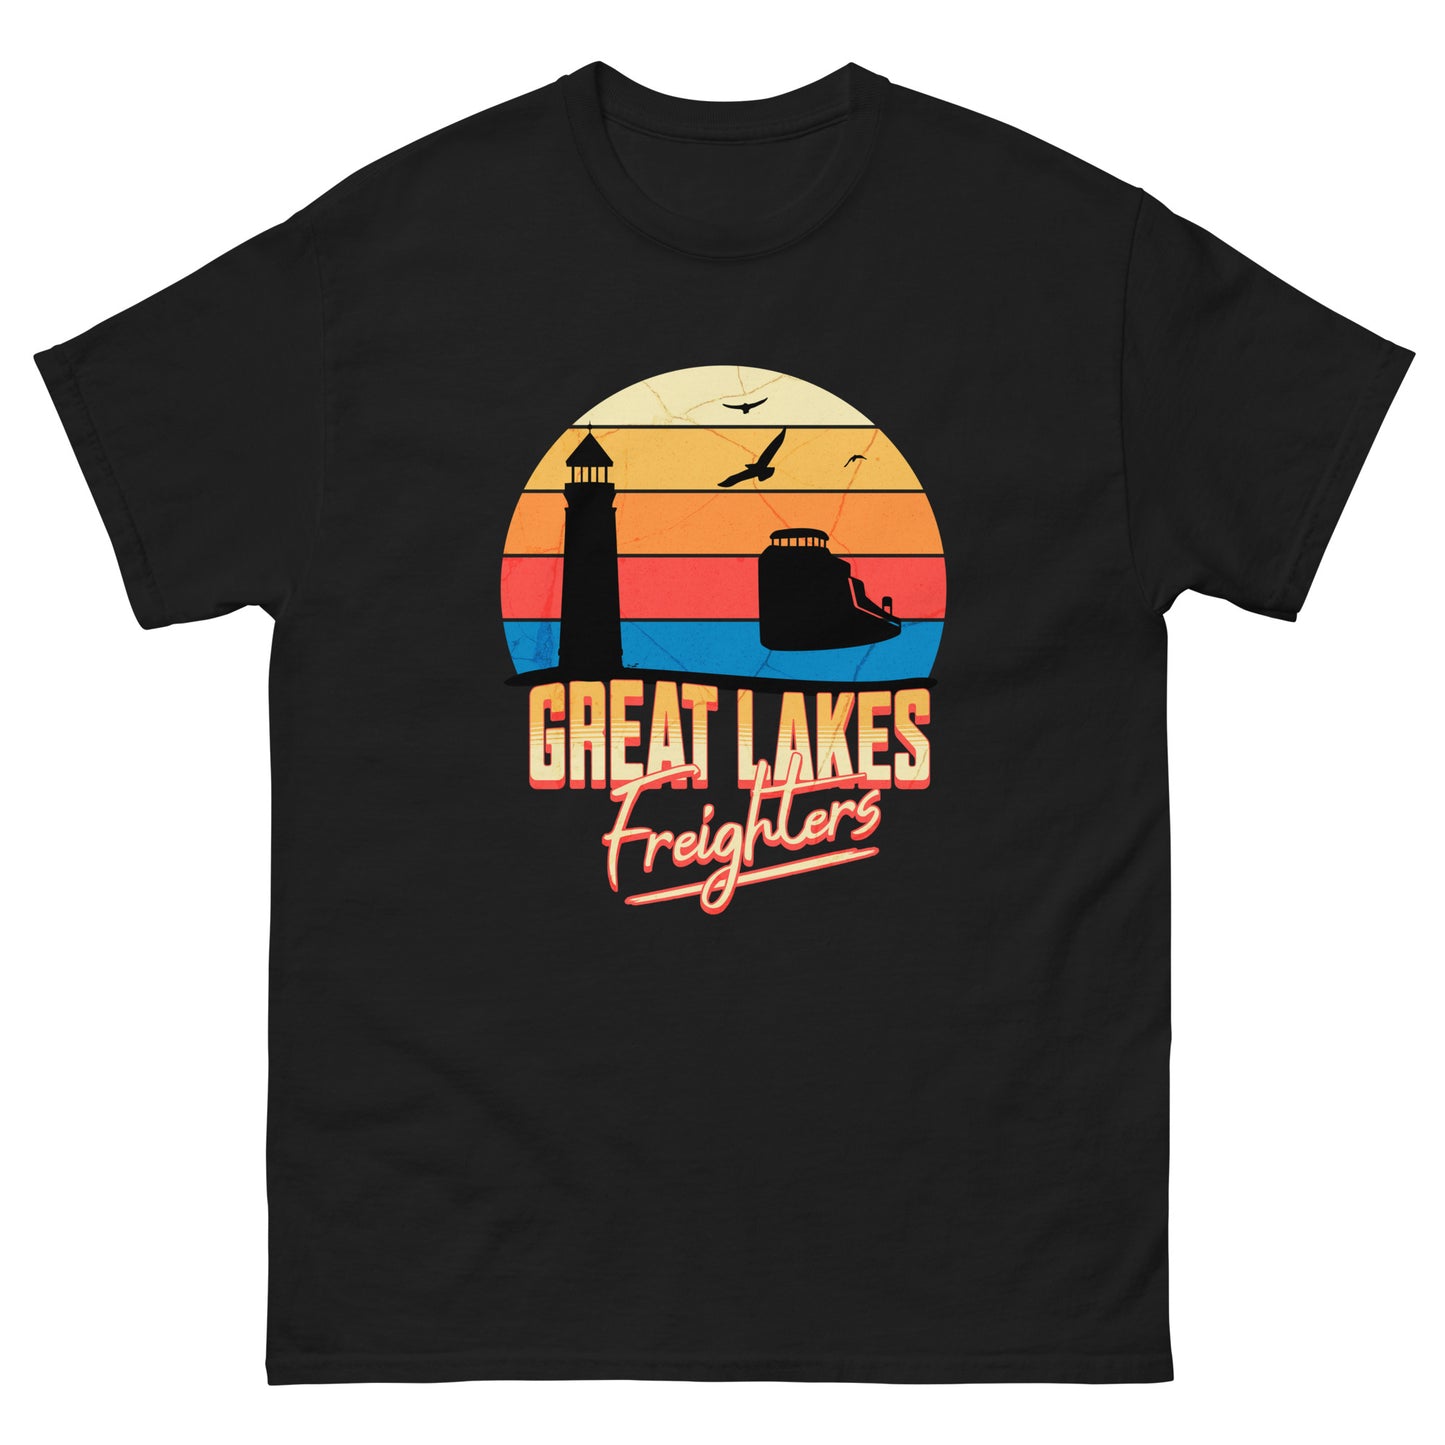 Great Lakes Freighters classic tee